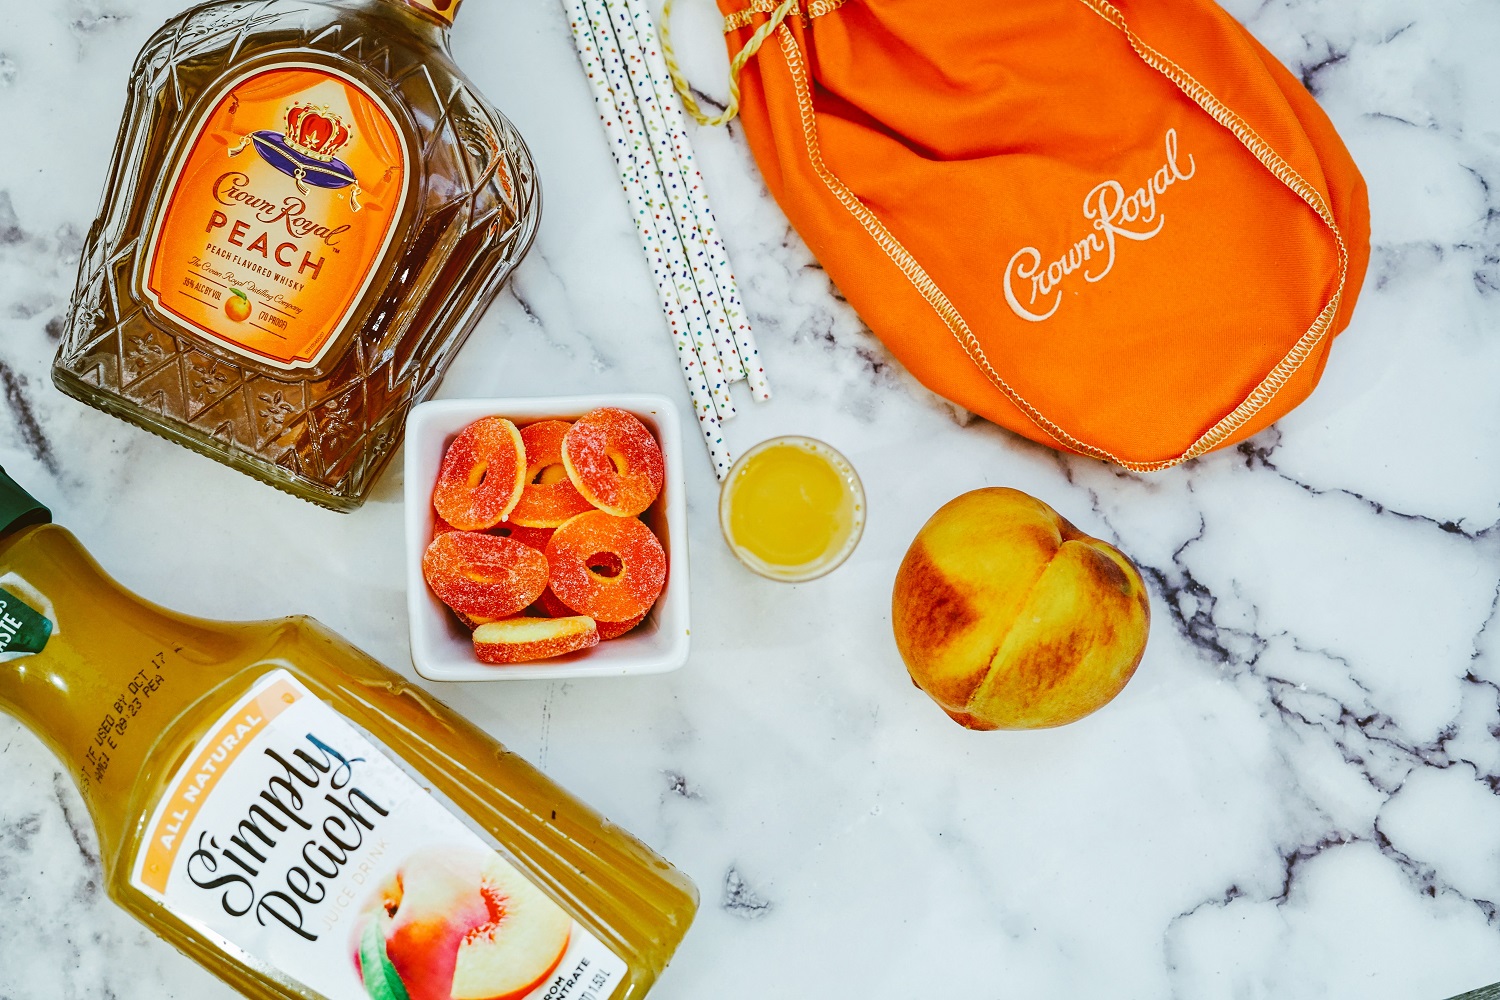 Ingredients for making Crown Royal Peach Whisky shooters.